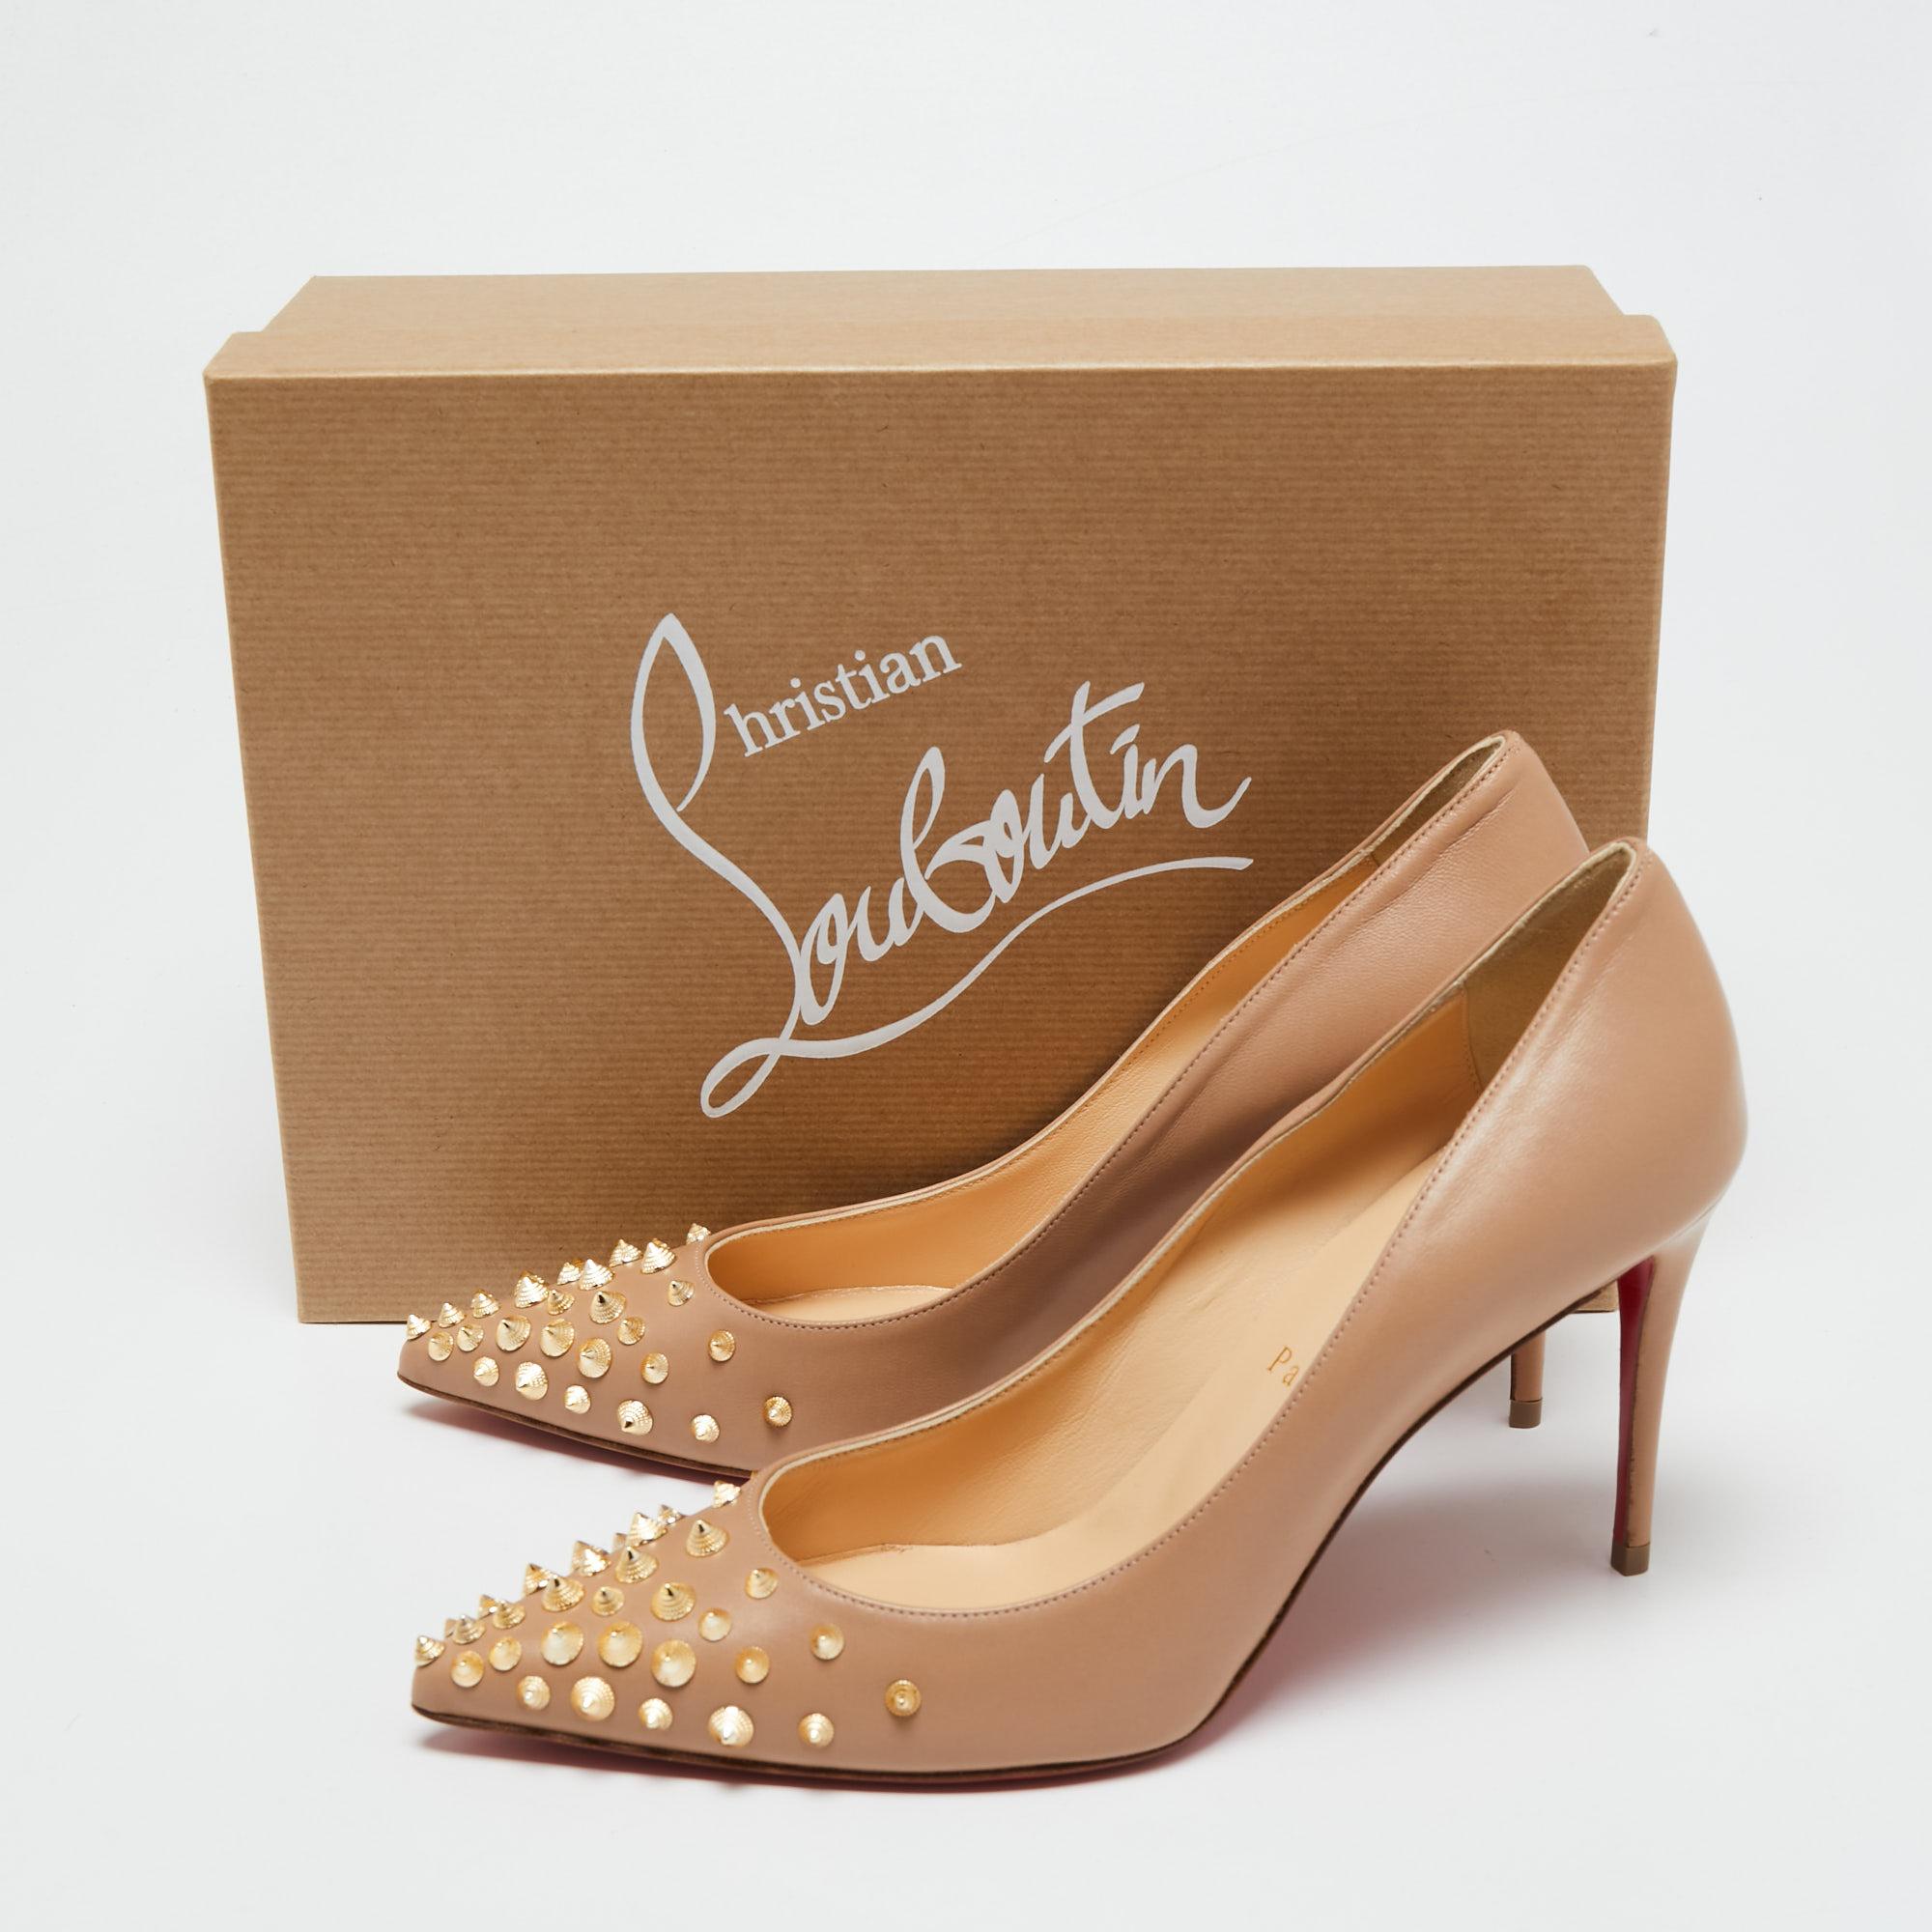 Christian Louboutin Beige Leather Spiky Shell Pumps Size 38 1